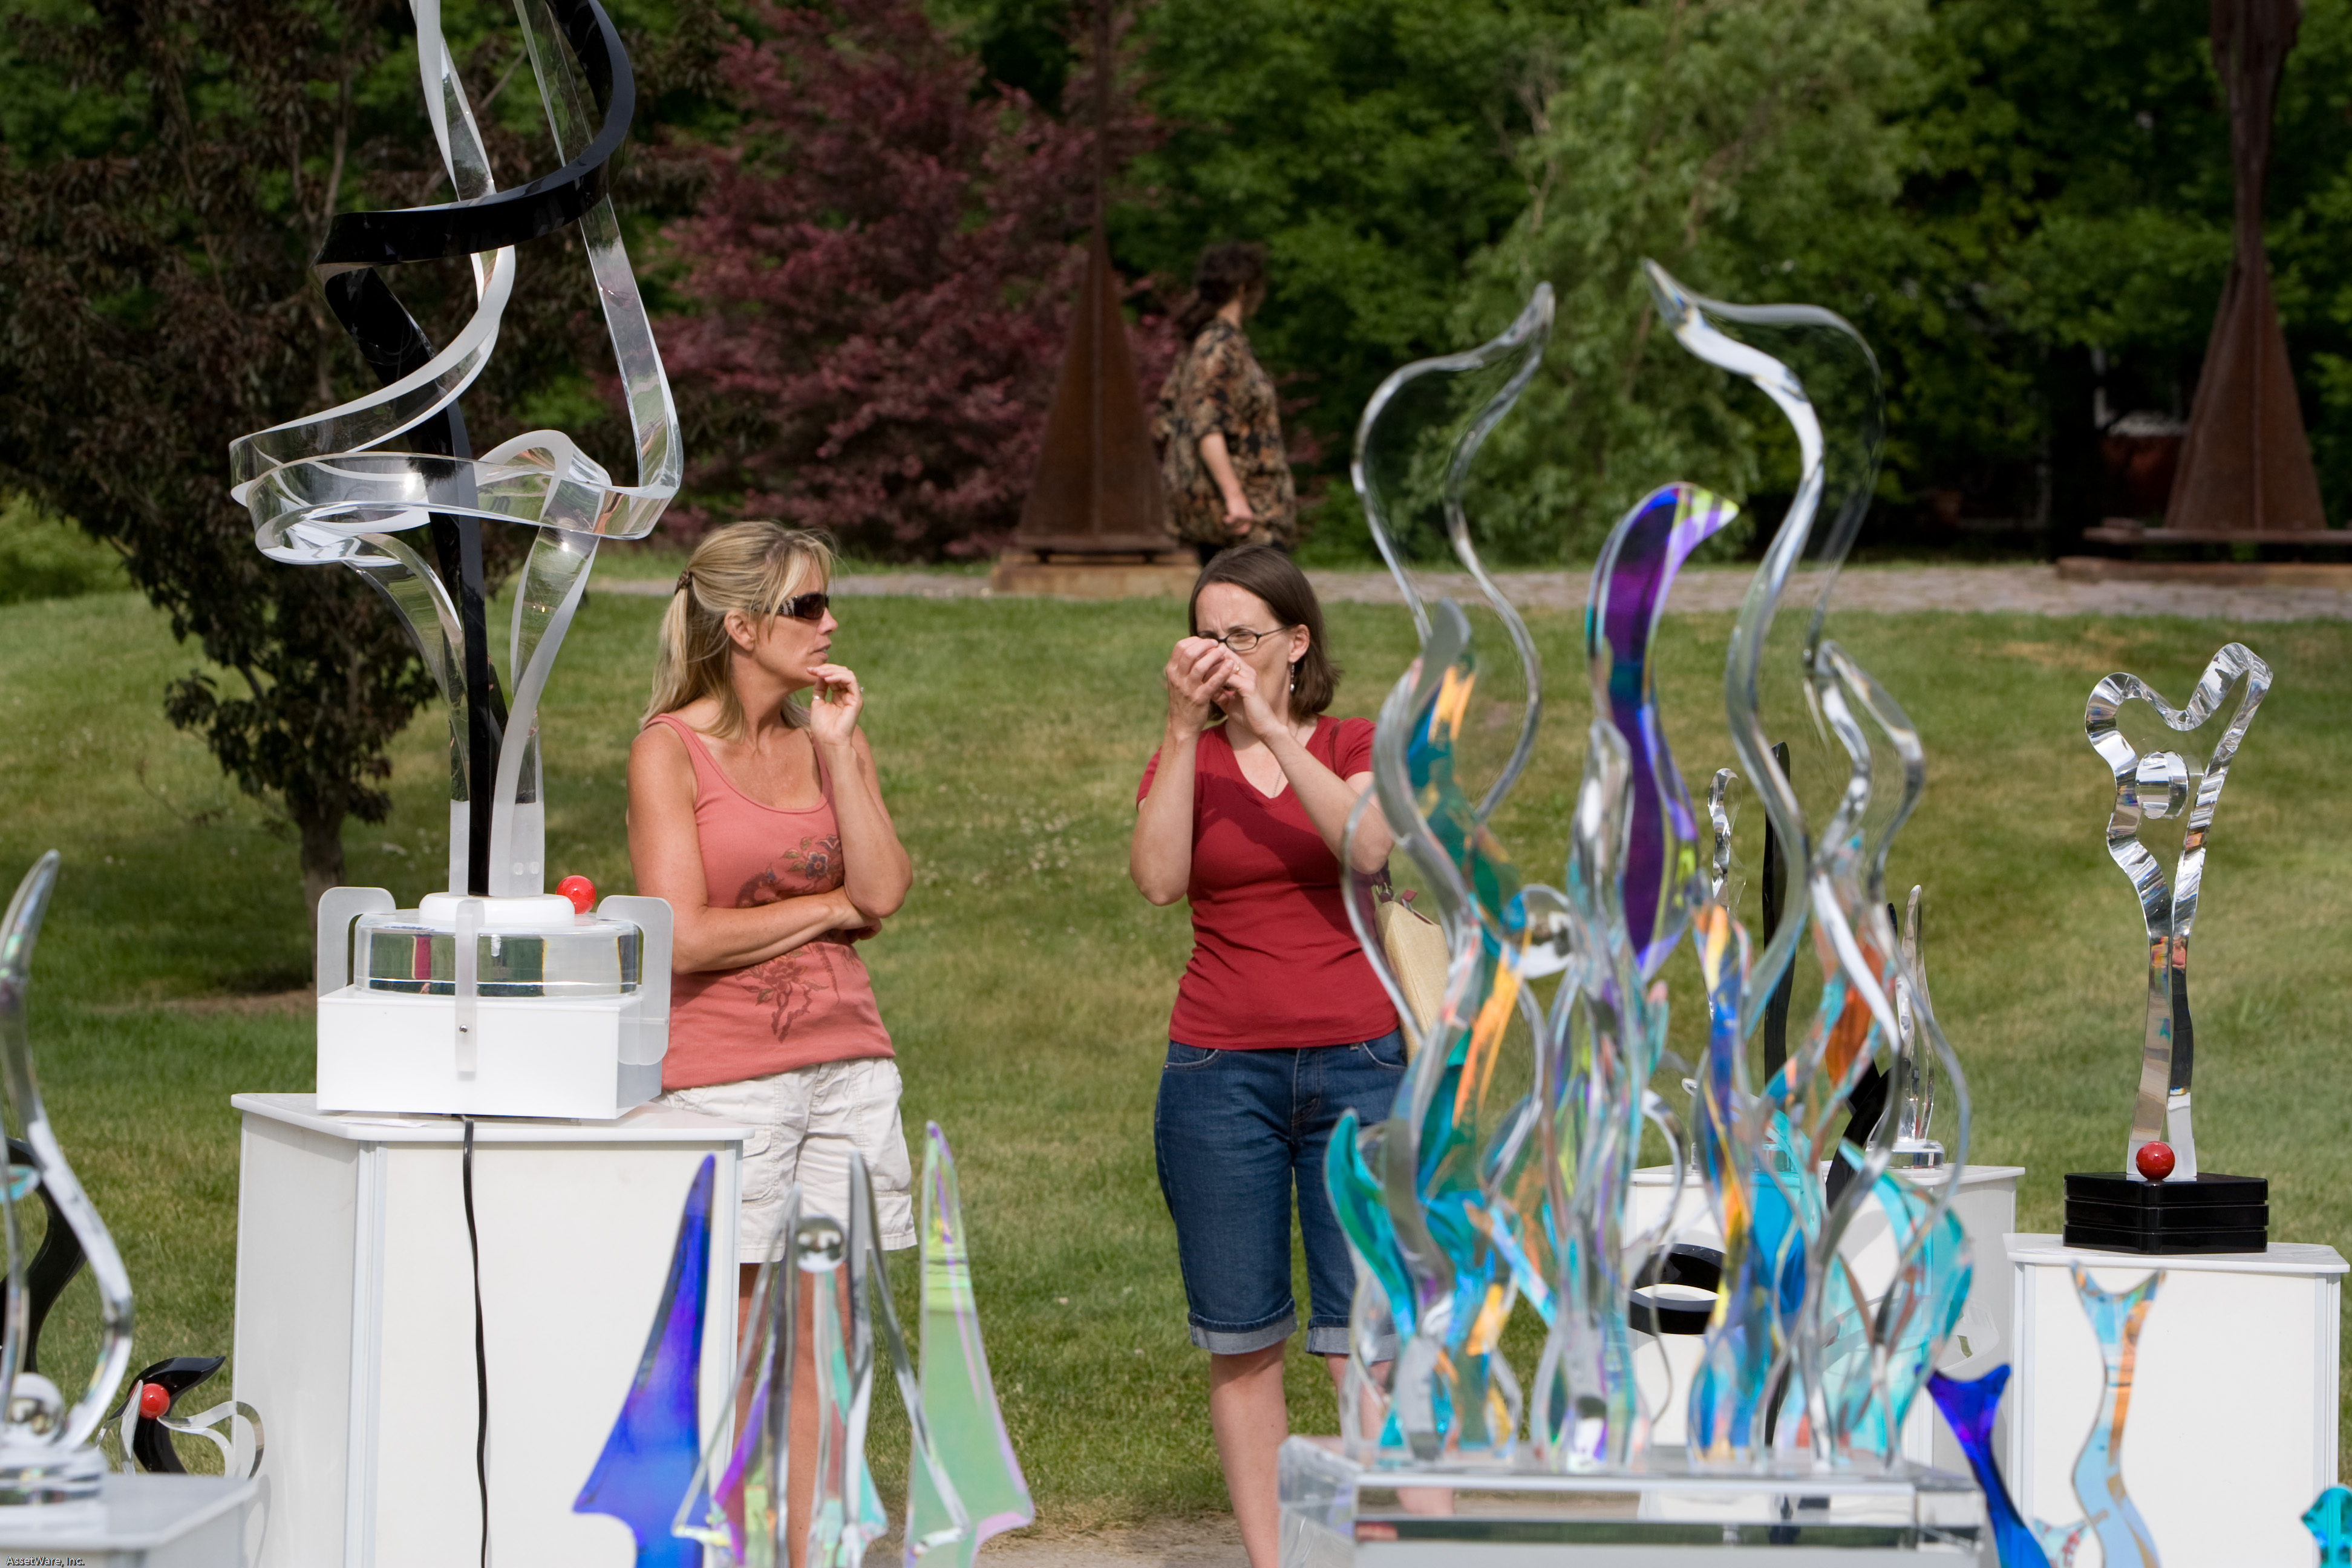 Ohio’s Oldest Outdoor Juried Art Show—Crosby Festival of the Arts